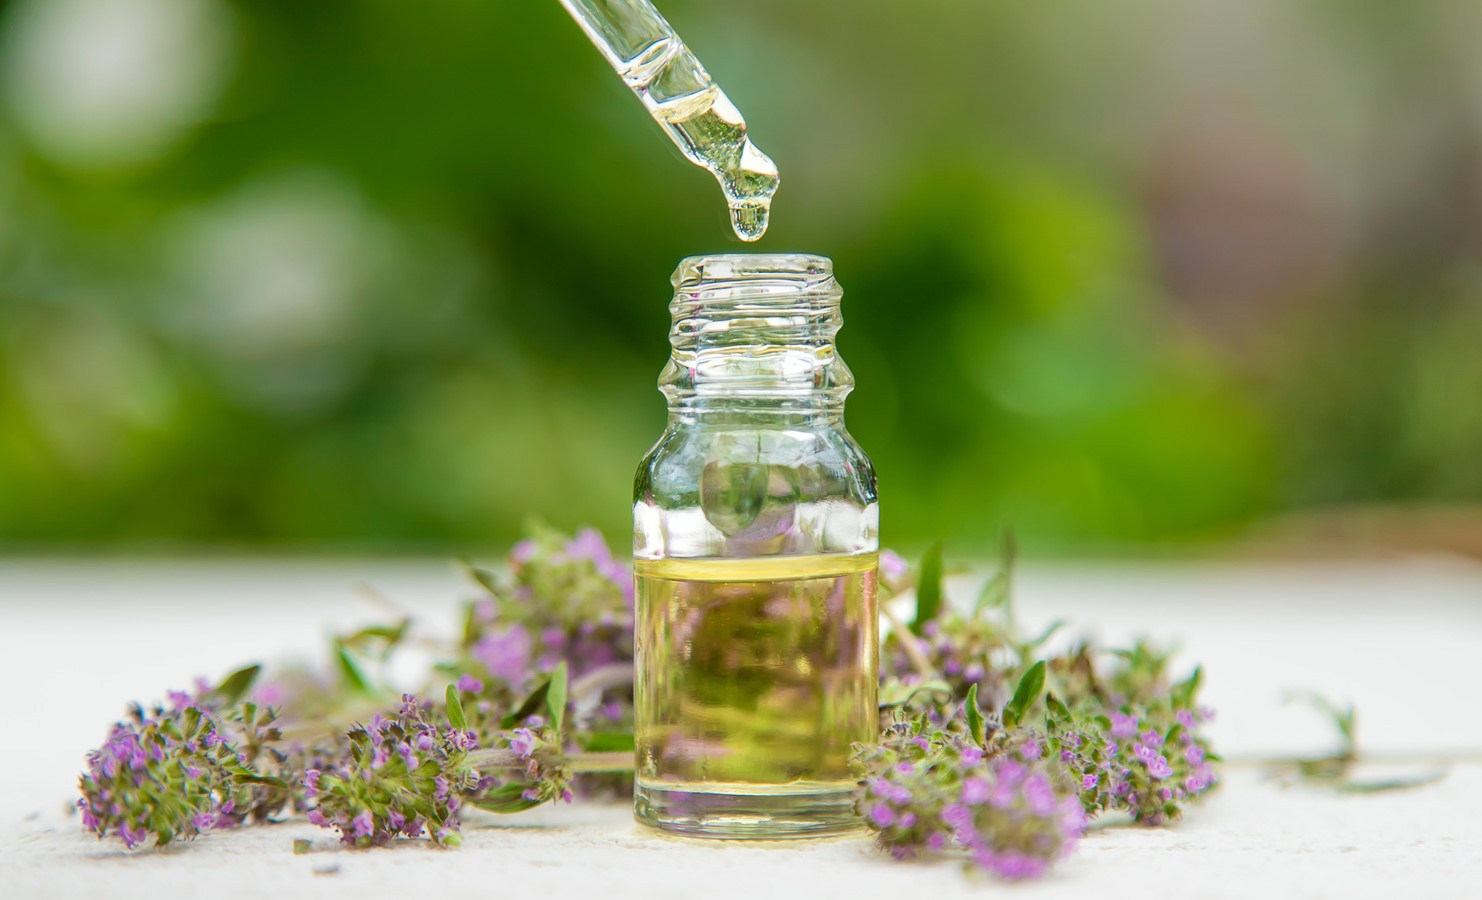 How To Use Thyme For Hair Growth